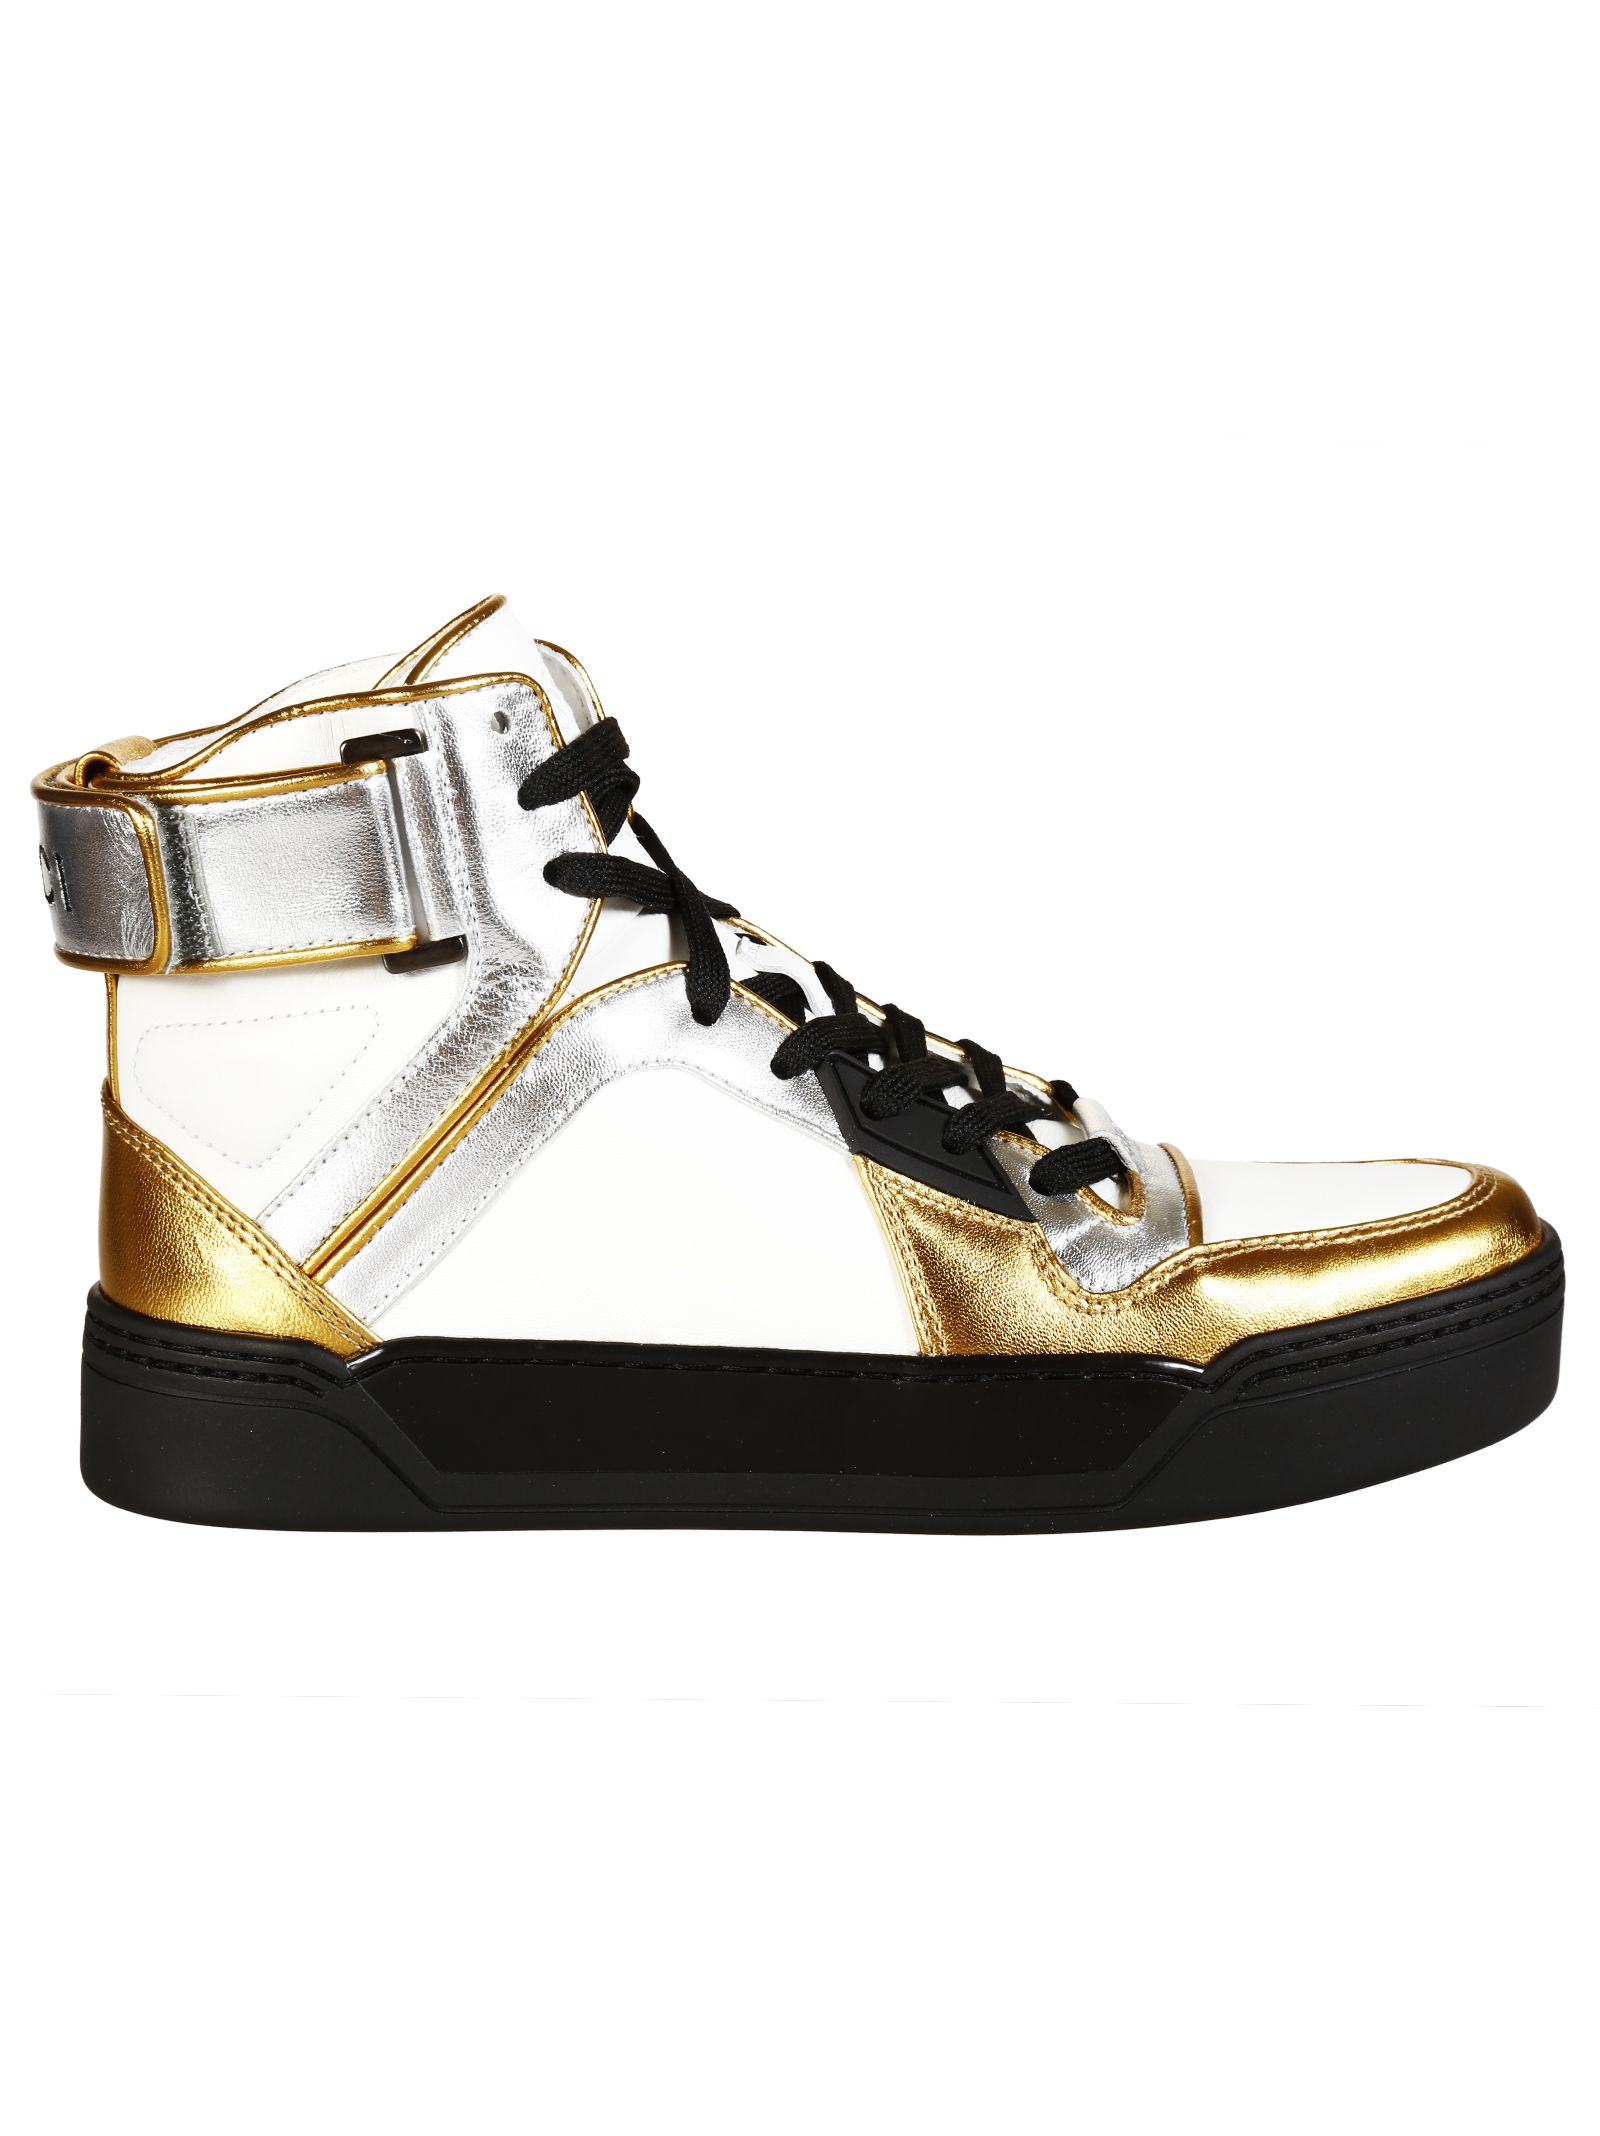 Gucci - Gucci New Basketball Metallic Leather High-Top Snekers ...